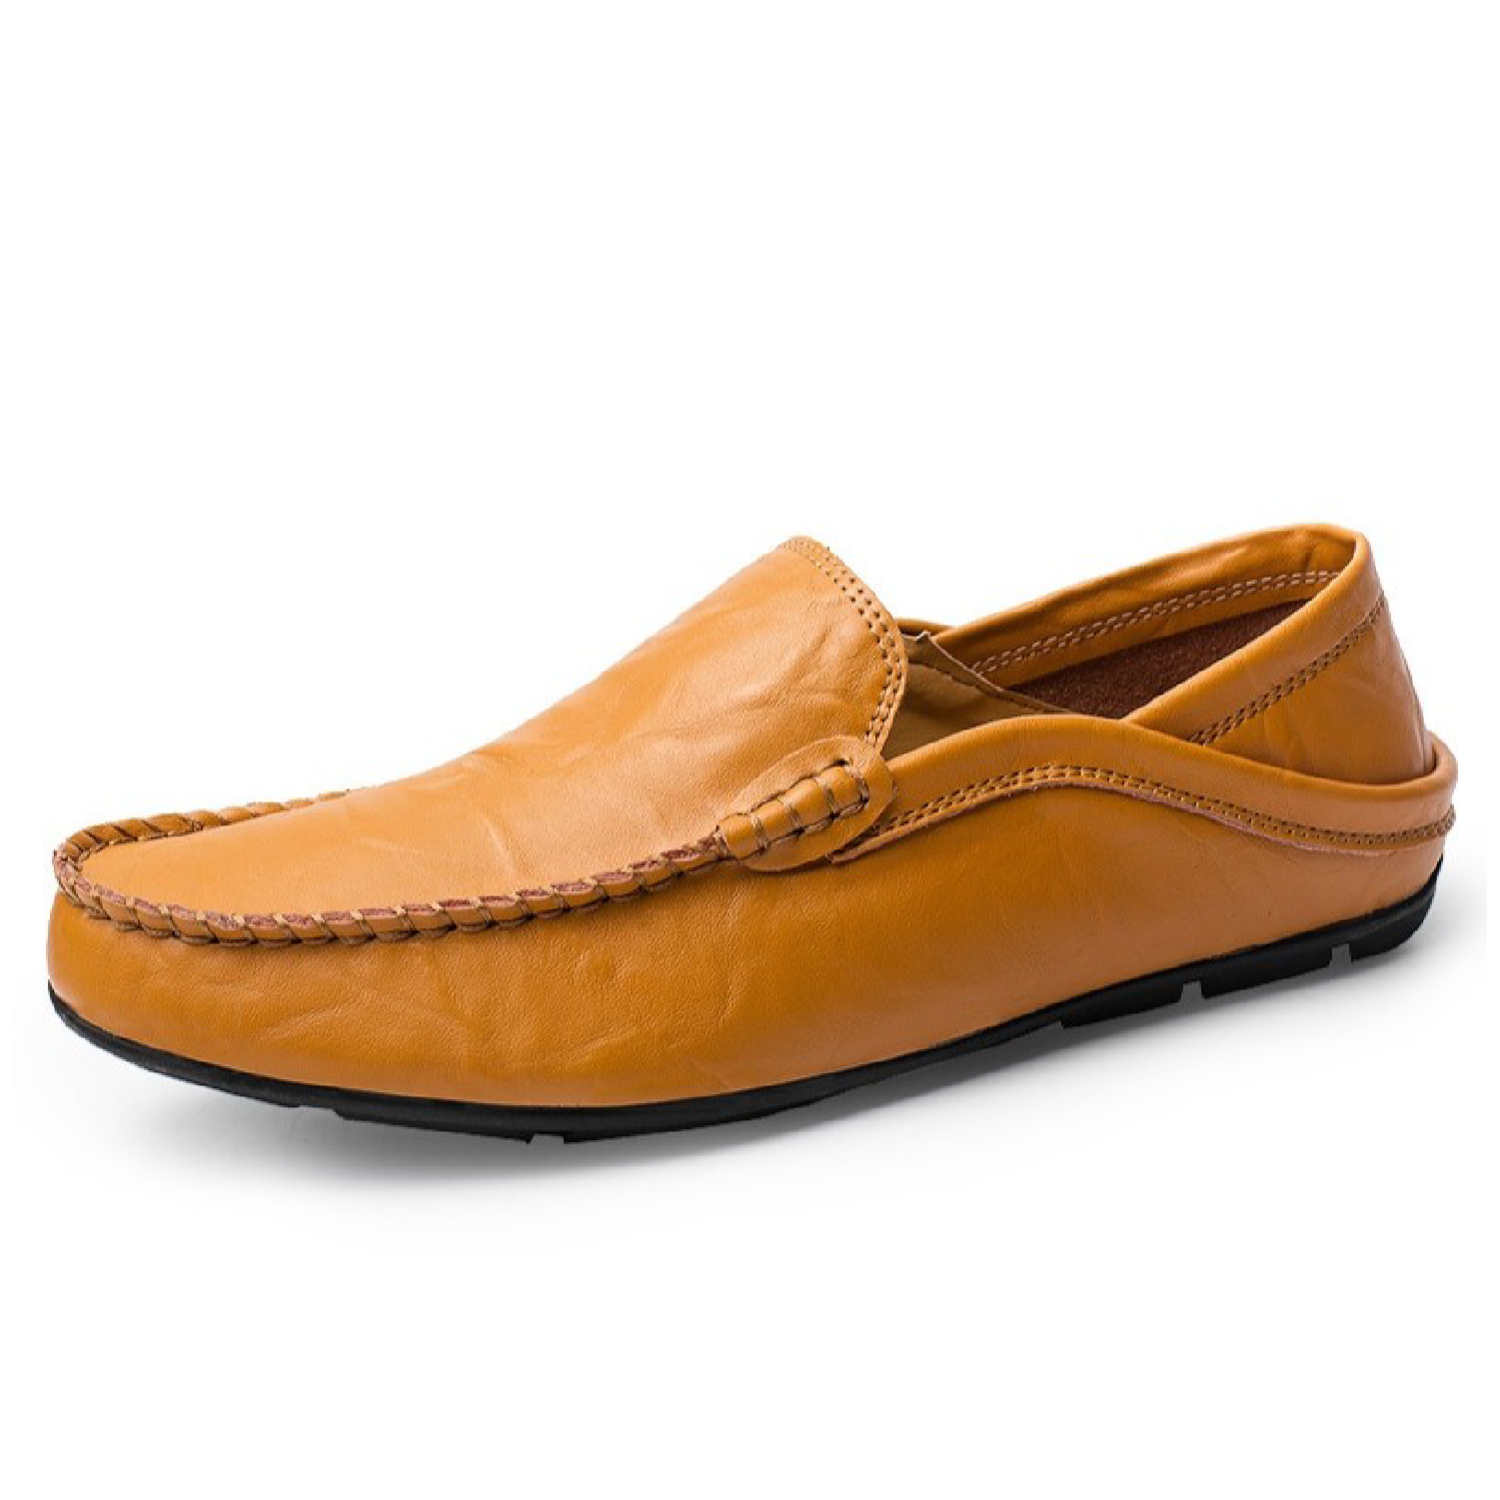 Casual Business Loafers Shoes